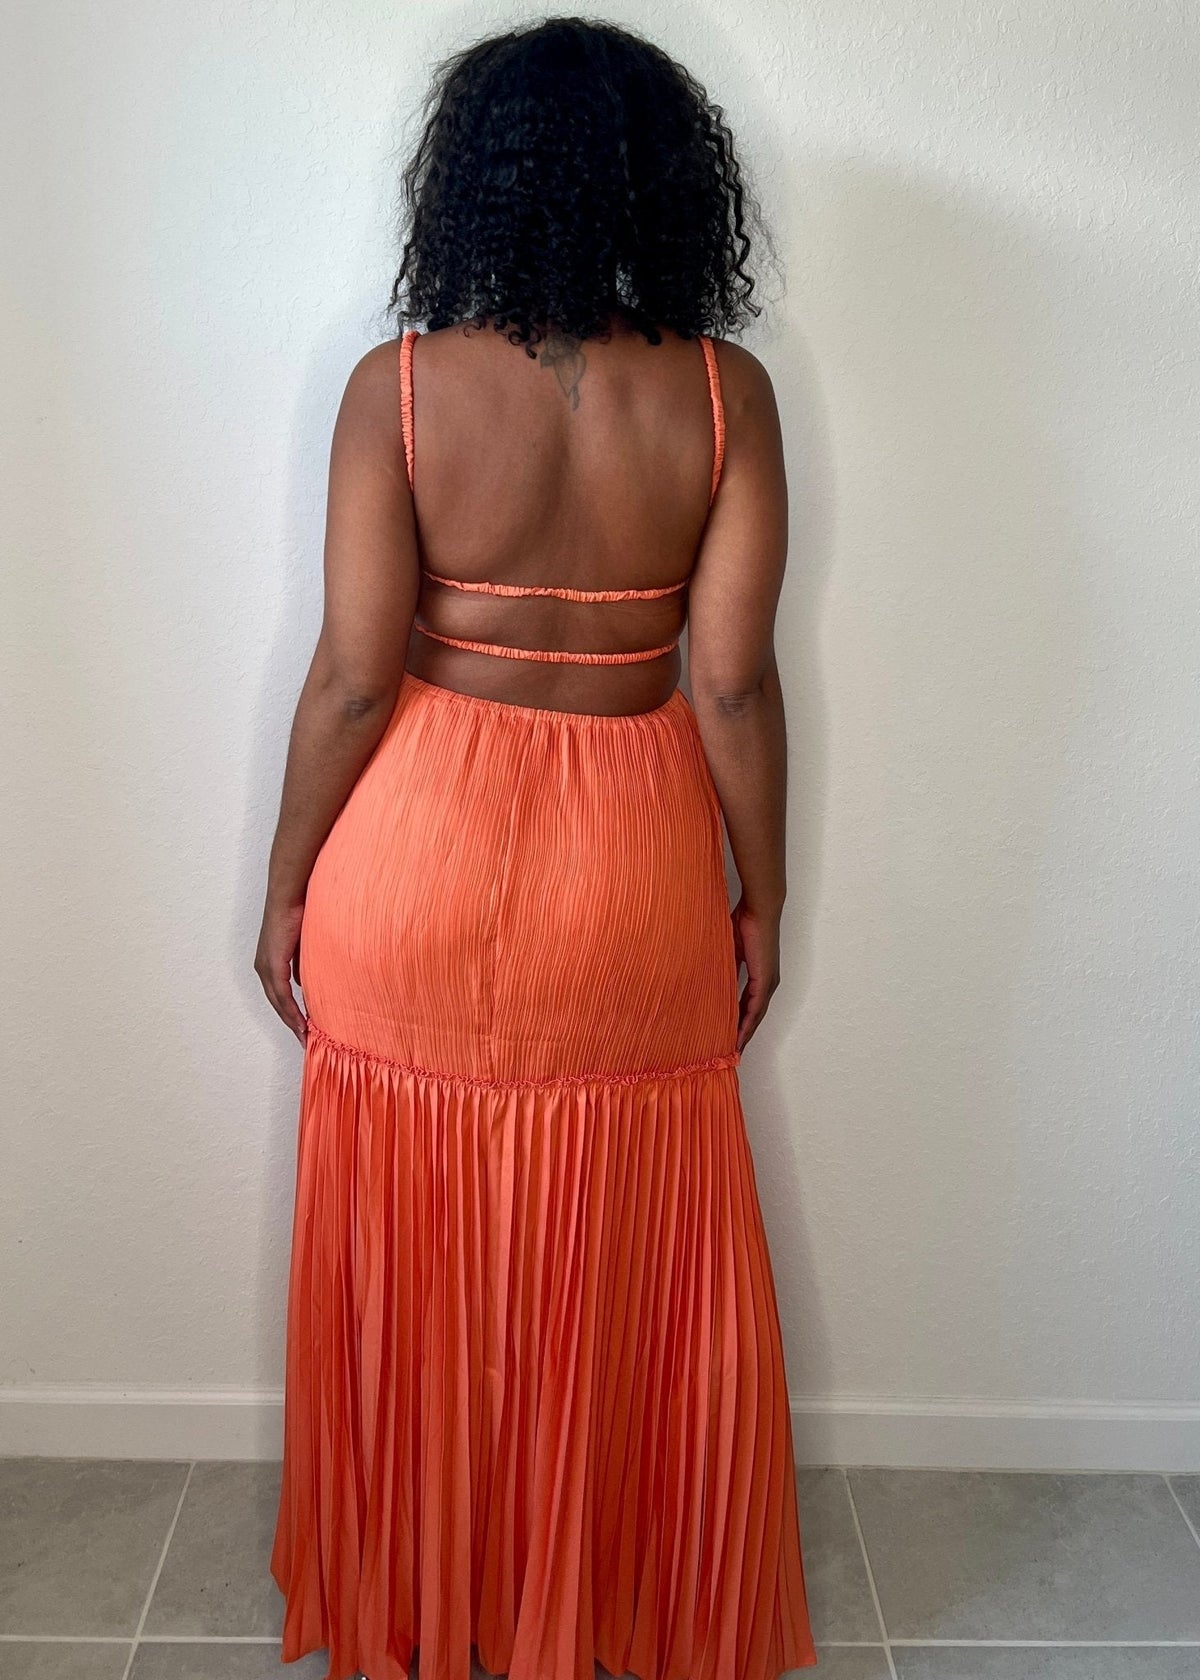 Get trendy with Orange Maxi Cut-Out Dress - Dresses available at ELLE TENAJ. Grab yours for $79.90 today!